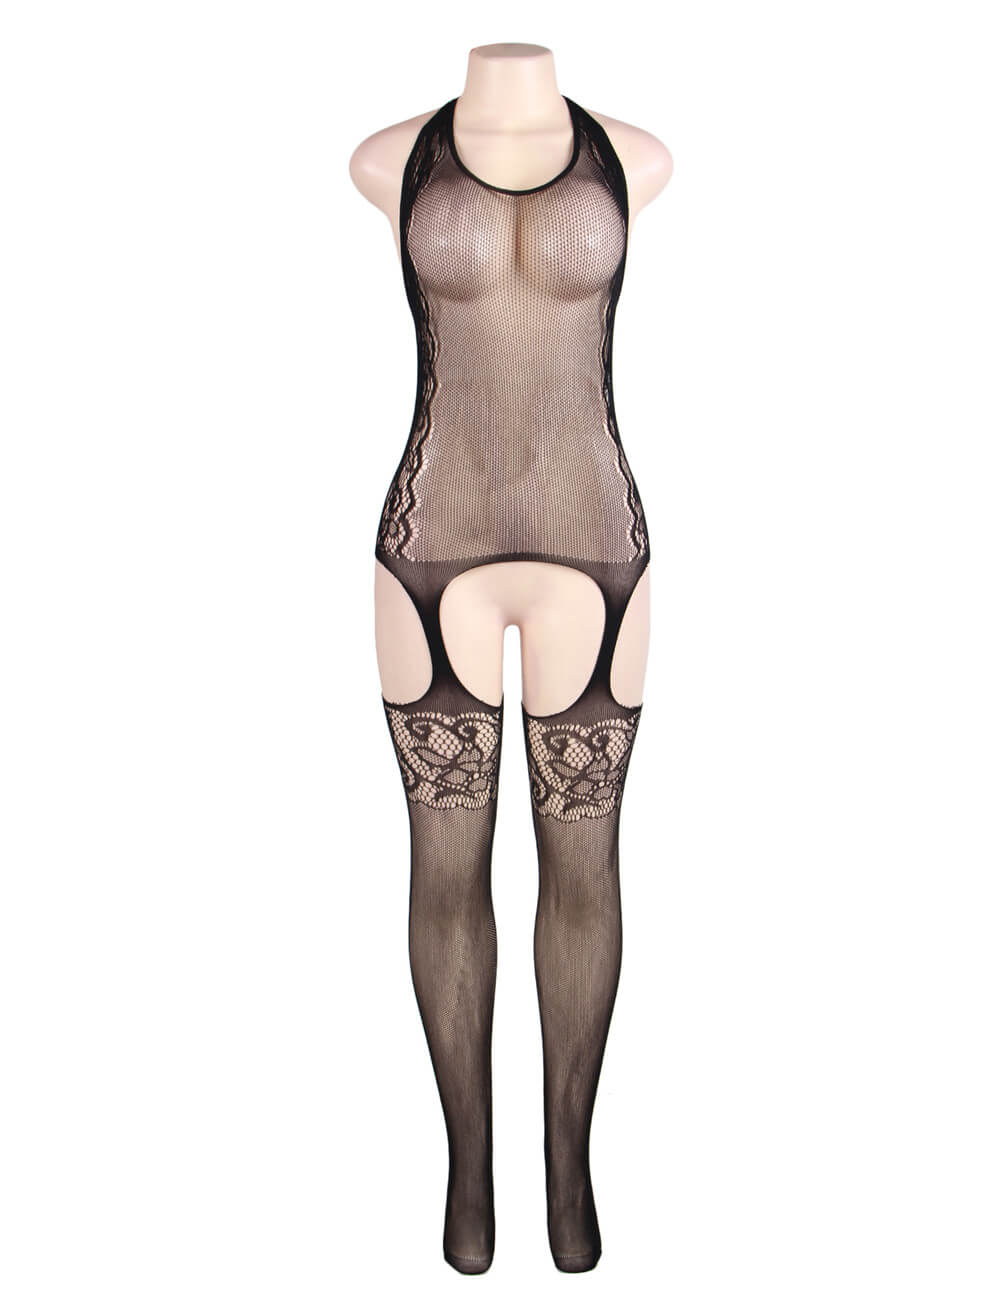 Sexy Delicate Crotchless Black Halter Fishnet Bodystocking Lingerie